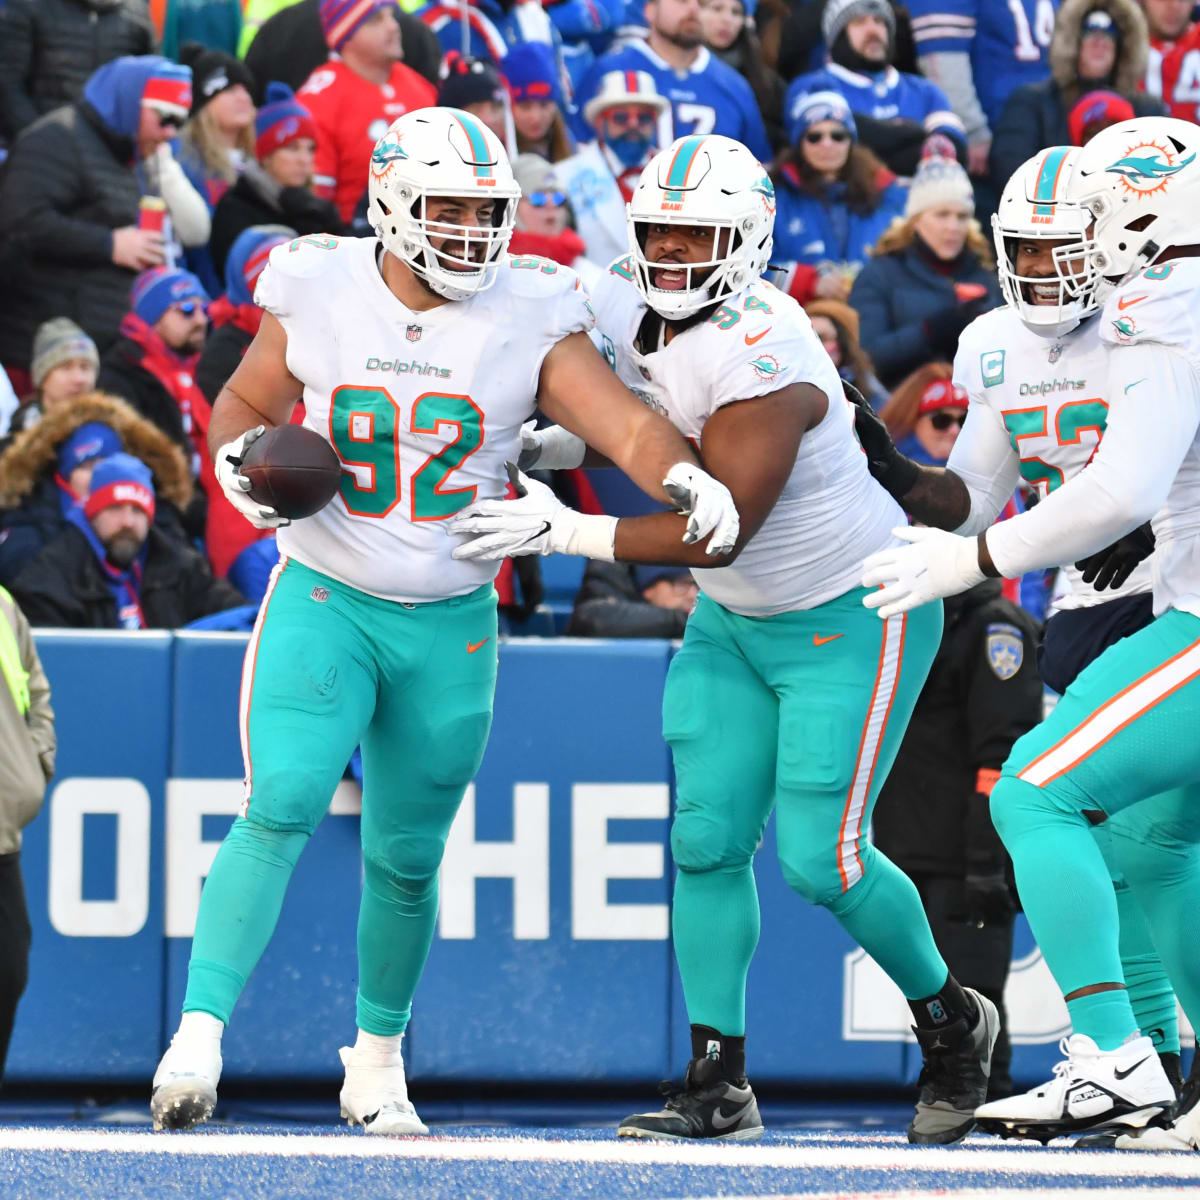 Buffalo Bills vs. Miami Dolphins: How to Watch, Betting Odds